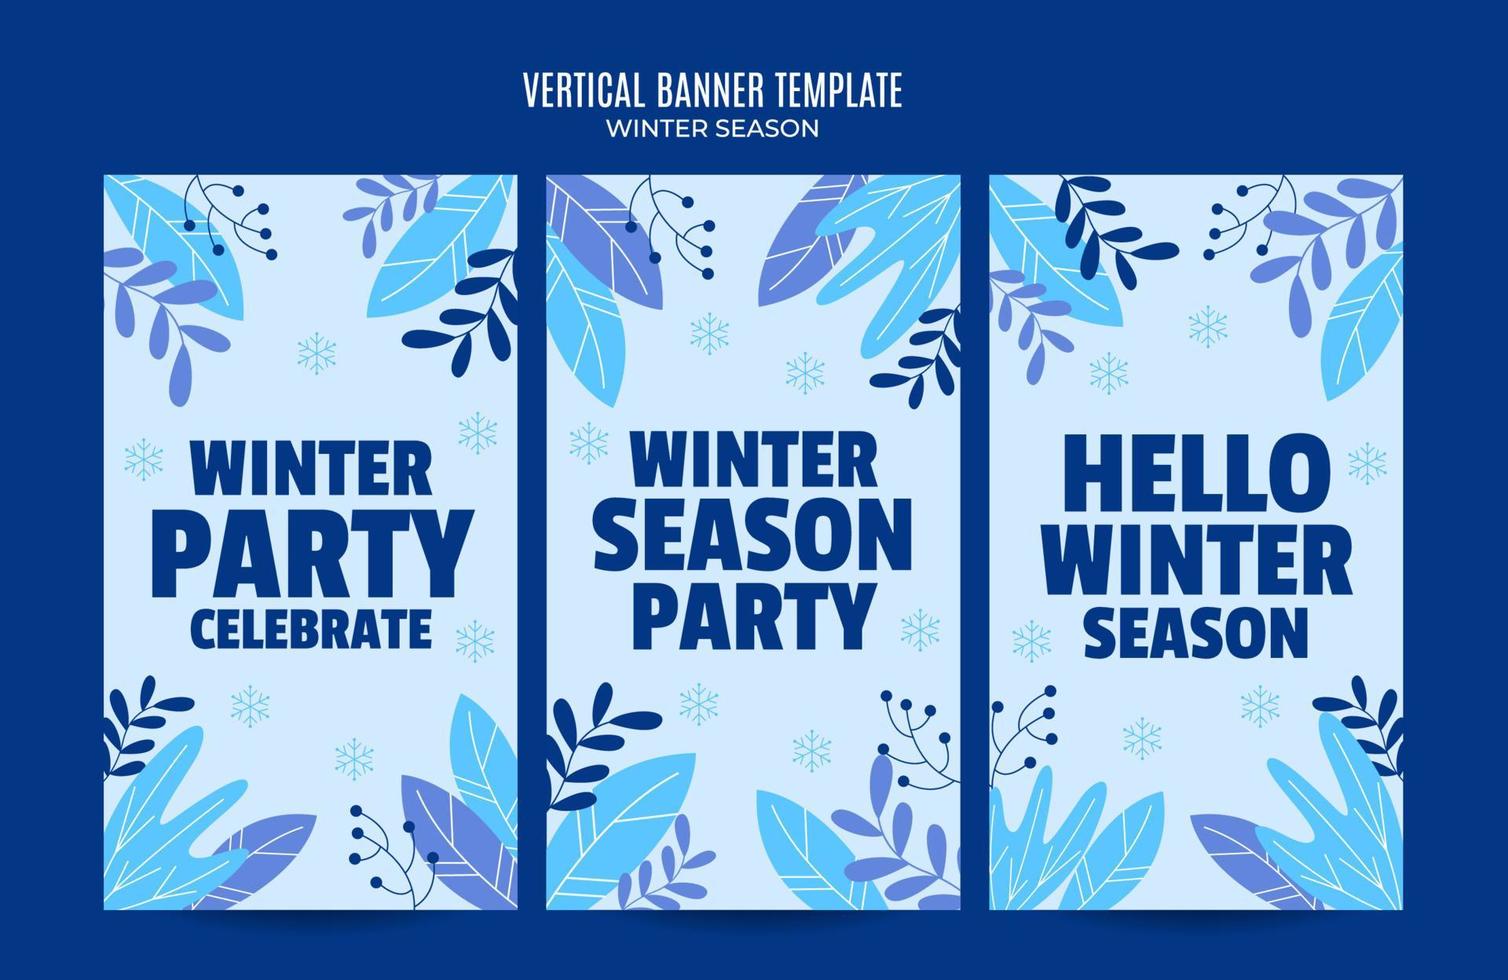 holiday winter design for advertising, banners, leaflets and flyers vector